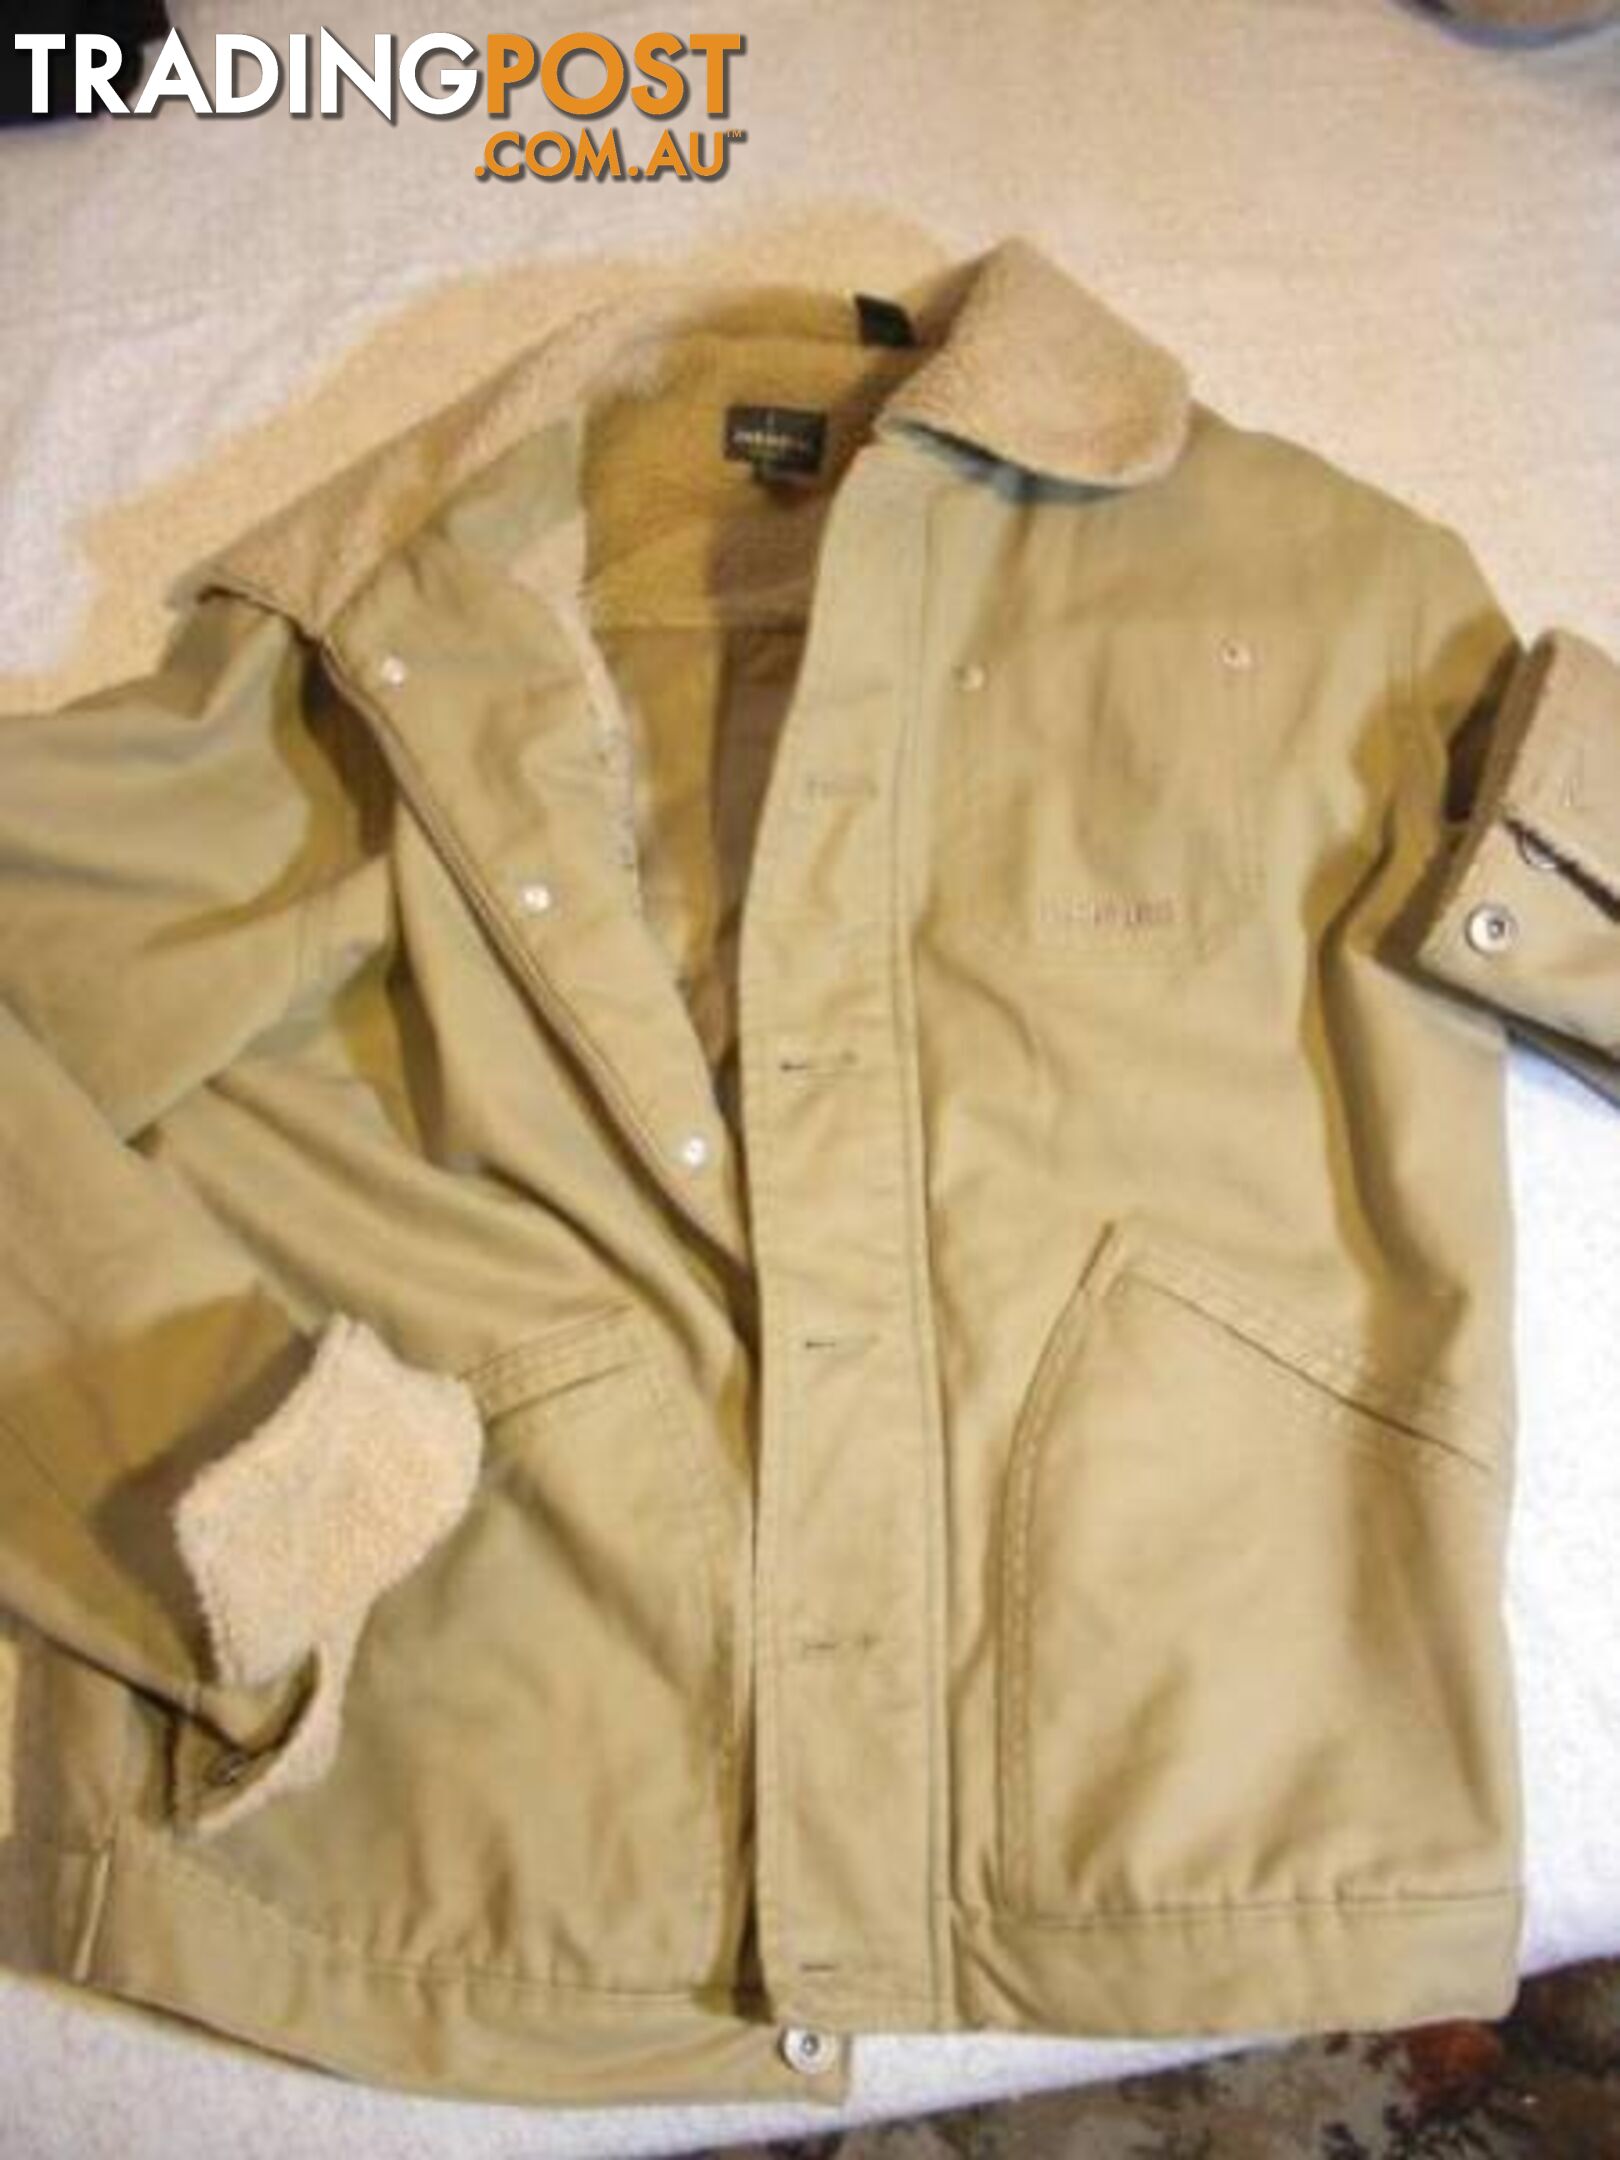 NEW INDUSTRIE INTERNATIONAL JACKET SIZE L insulated thick